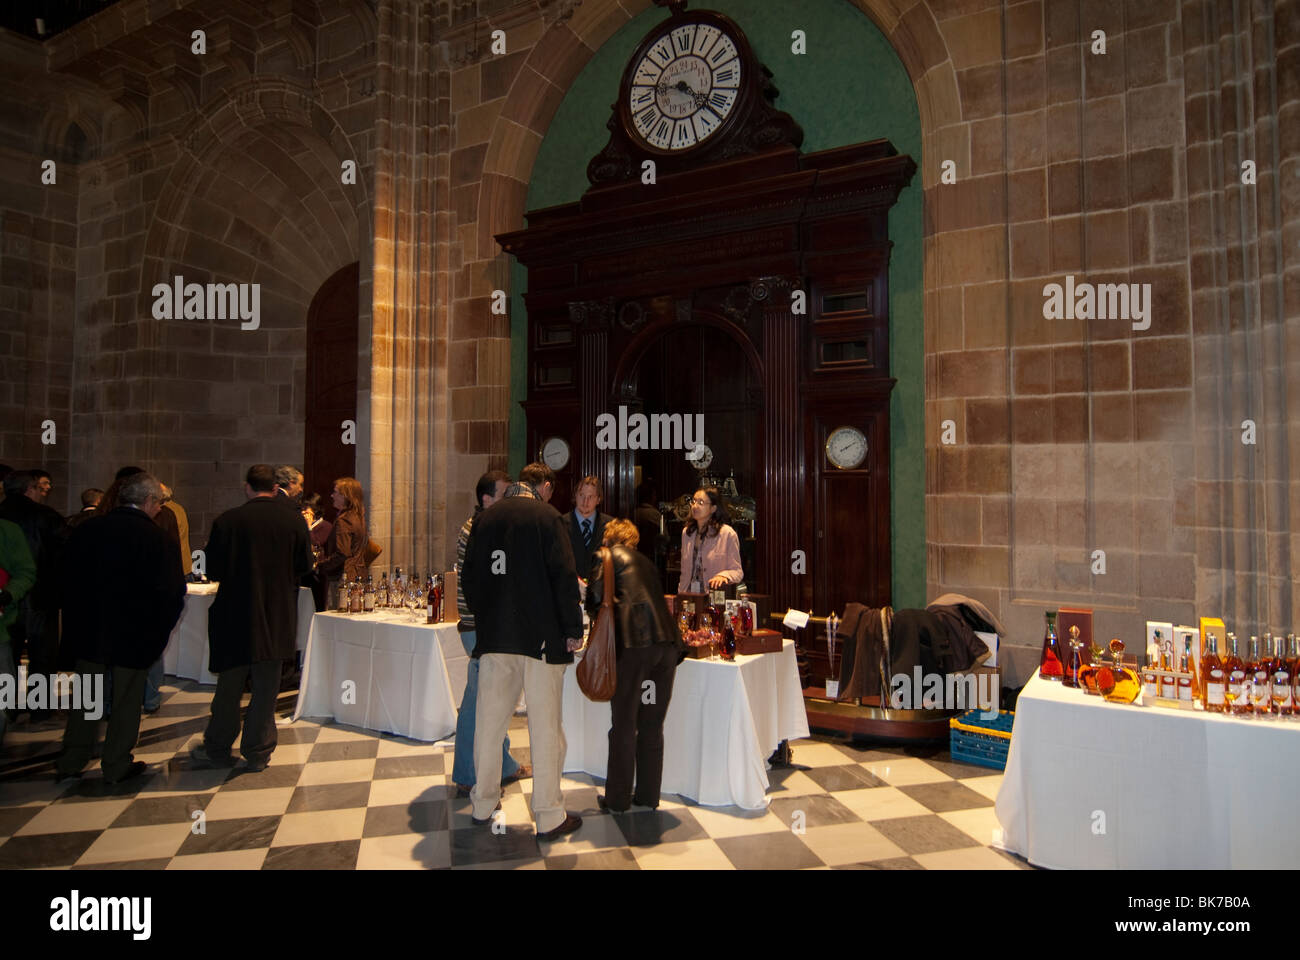 stands at a wine tasting event during a trade show in an old palace Stock Photo